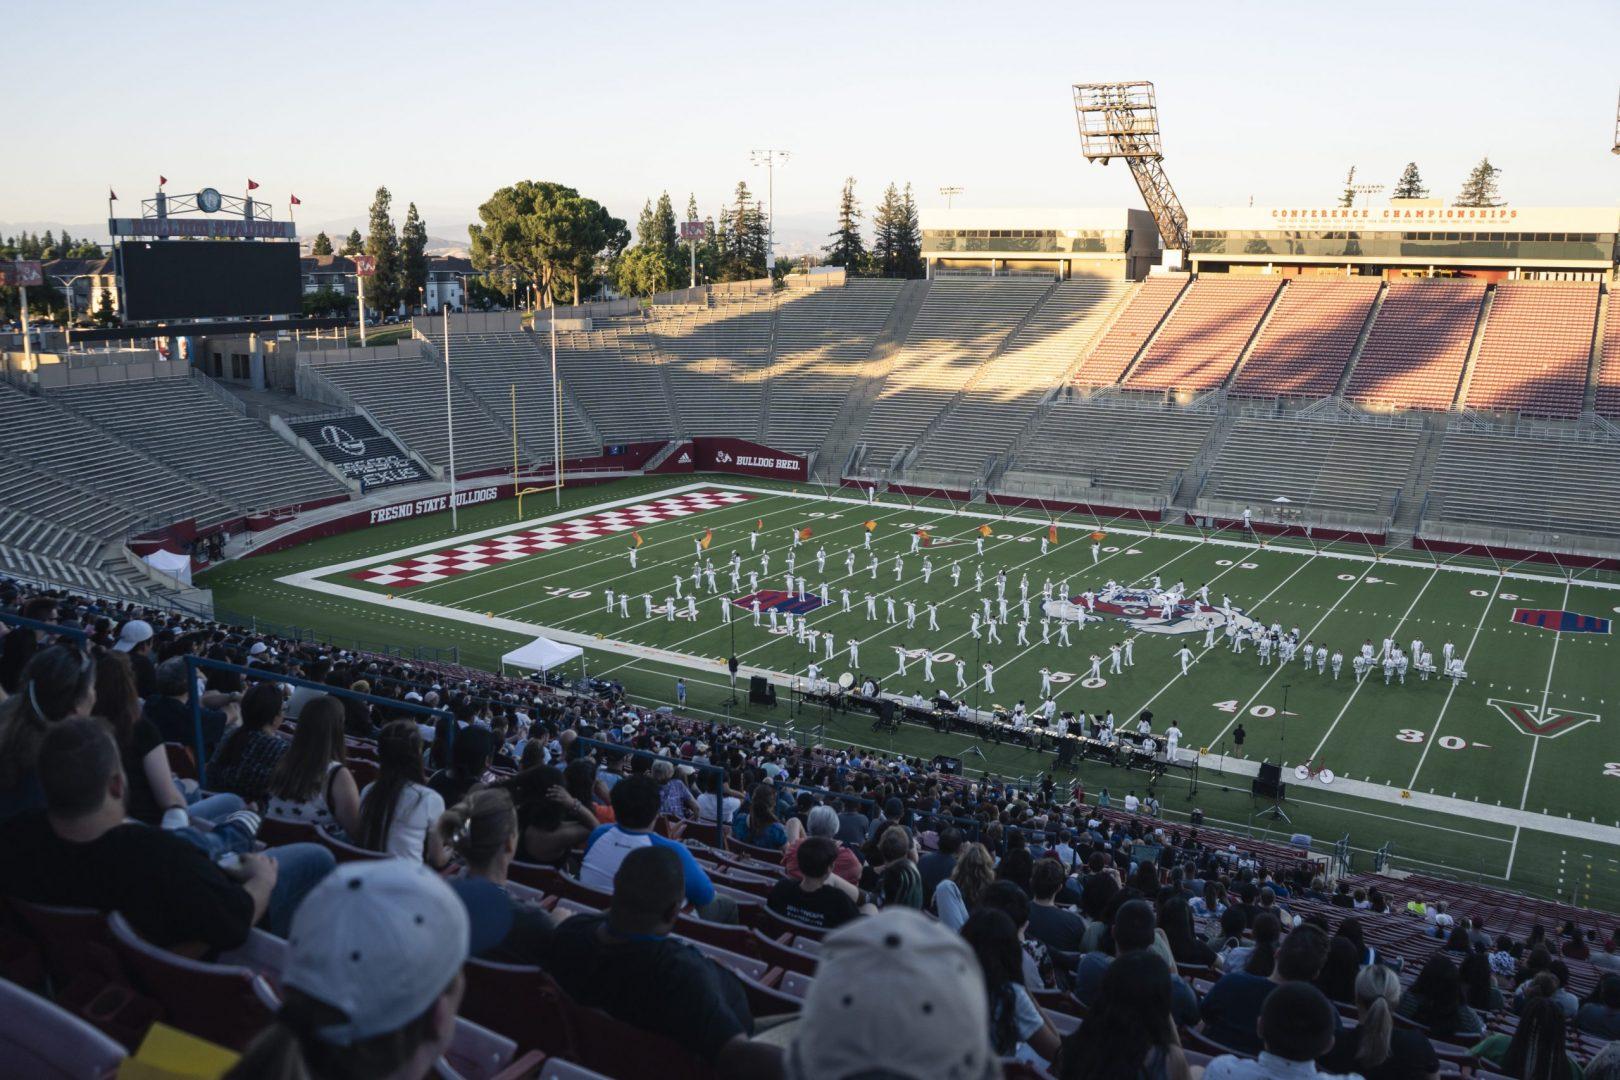 Bulldog Stadium during the MidCal Champions Showcase competition on July 5, 2022. The stadium will be renamed Valley Childrens Stadium following a partnership between Fresno State Athletics and Valley Childrens Healthcare. (Wyatt Bible/ The Collegian)